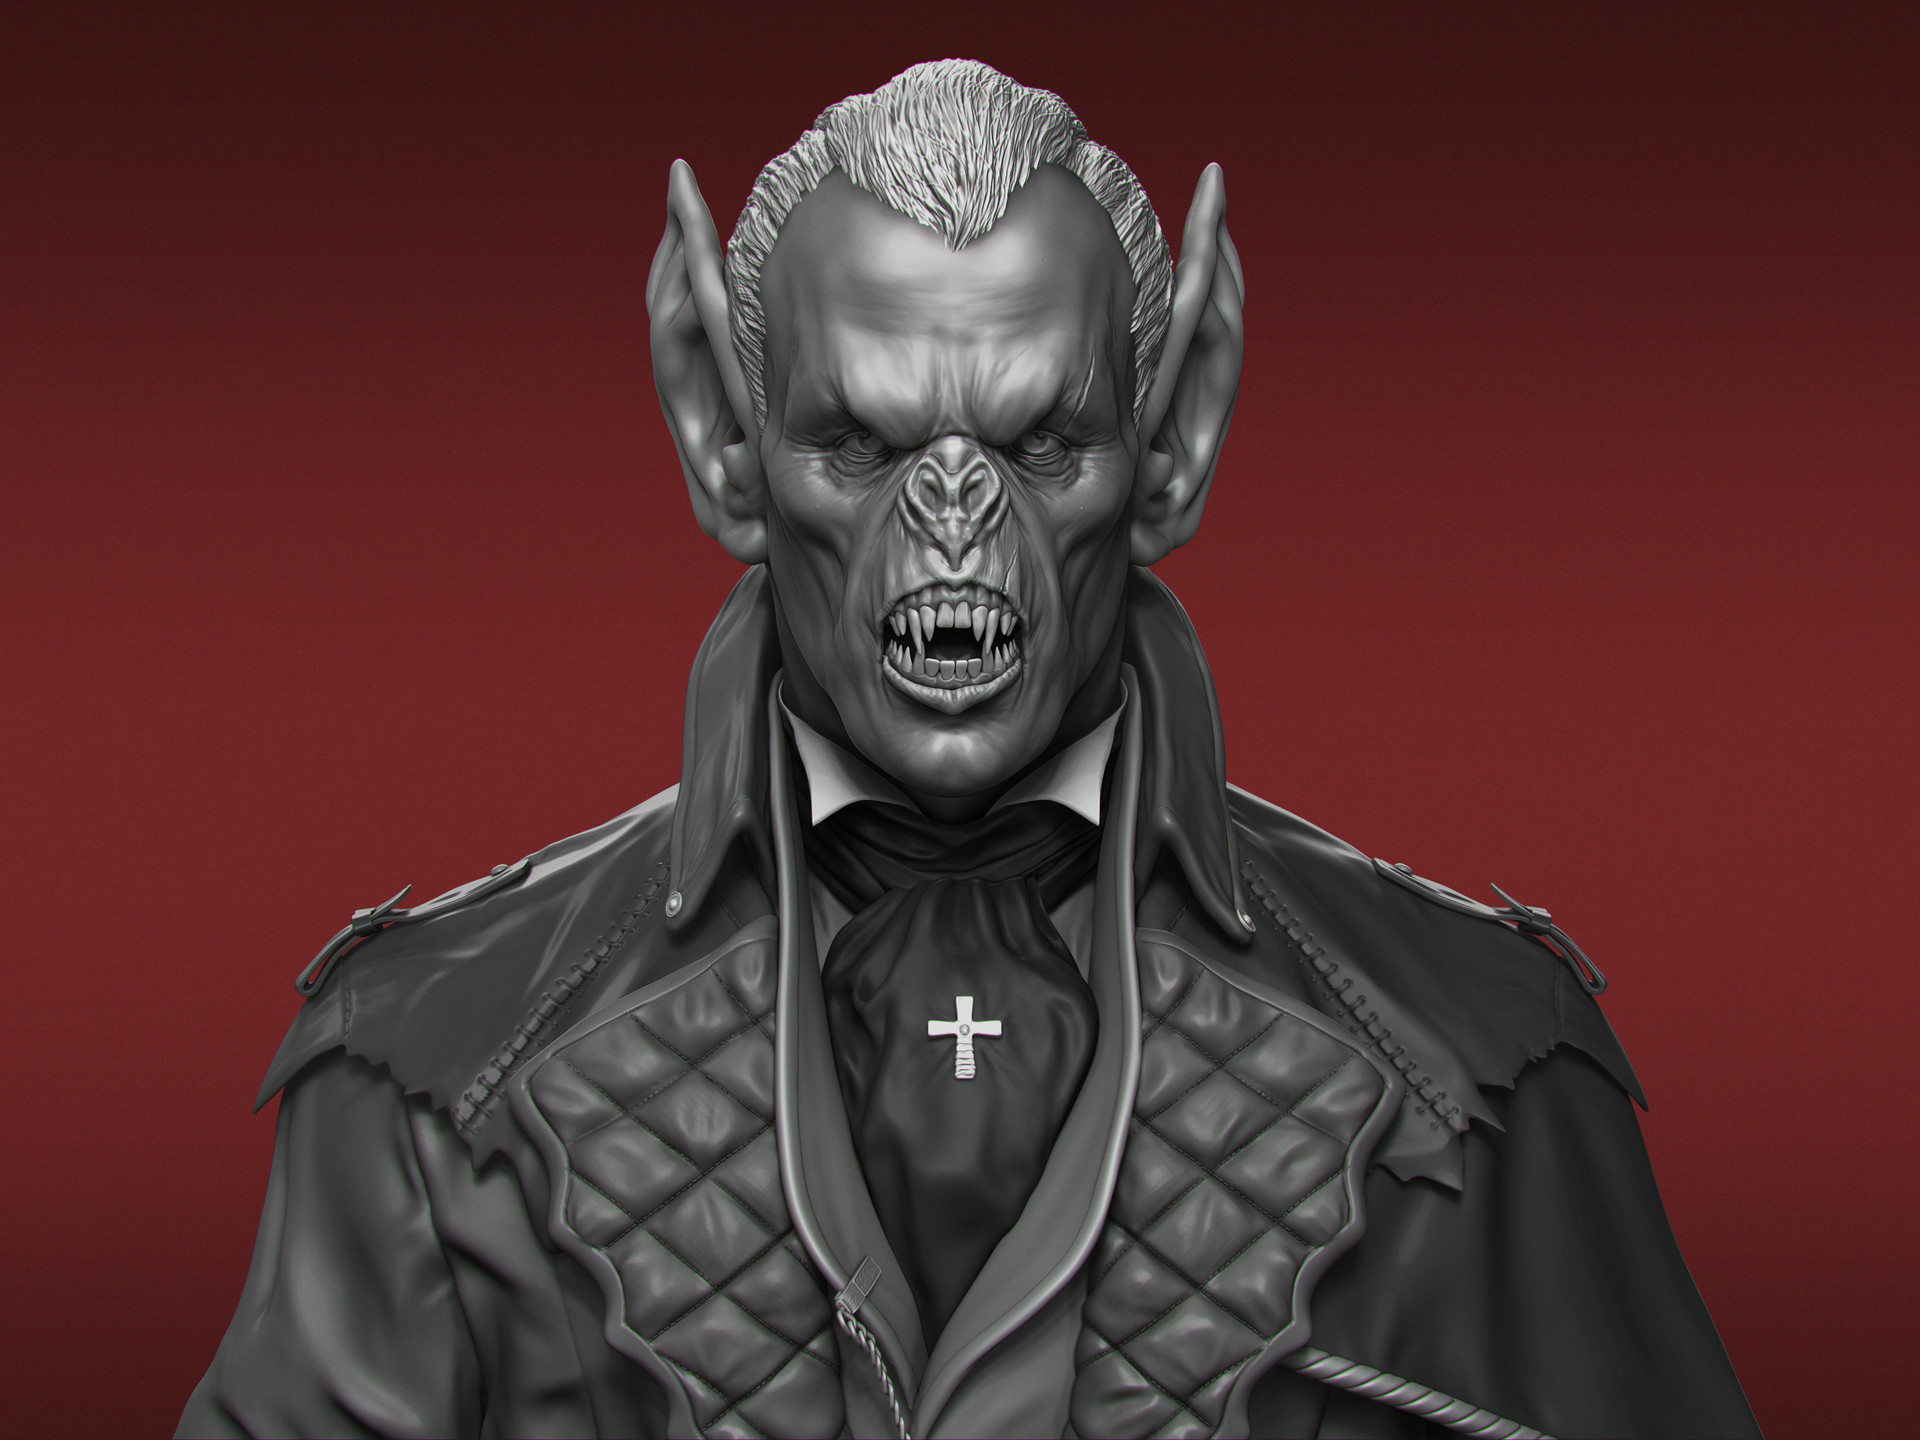 Vampire Lord bust.